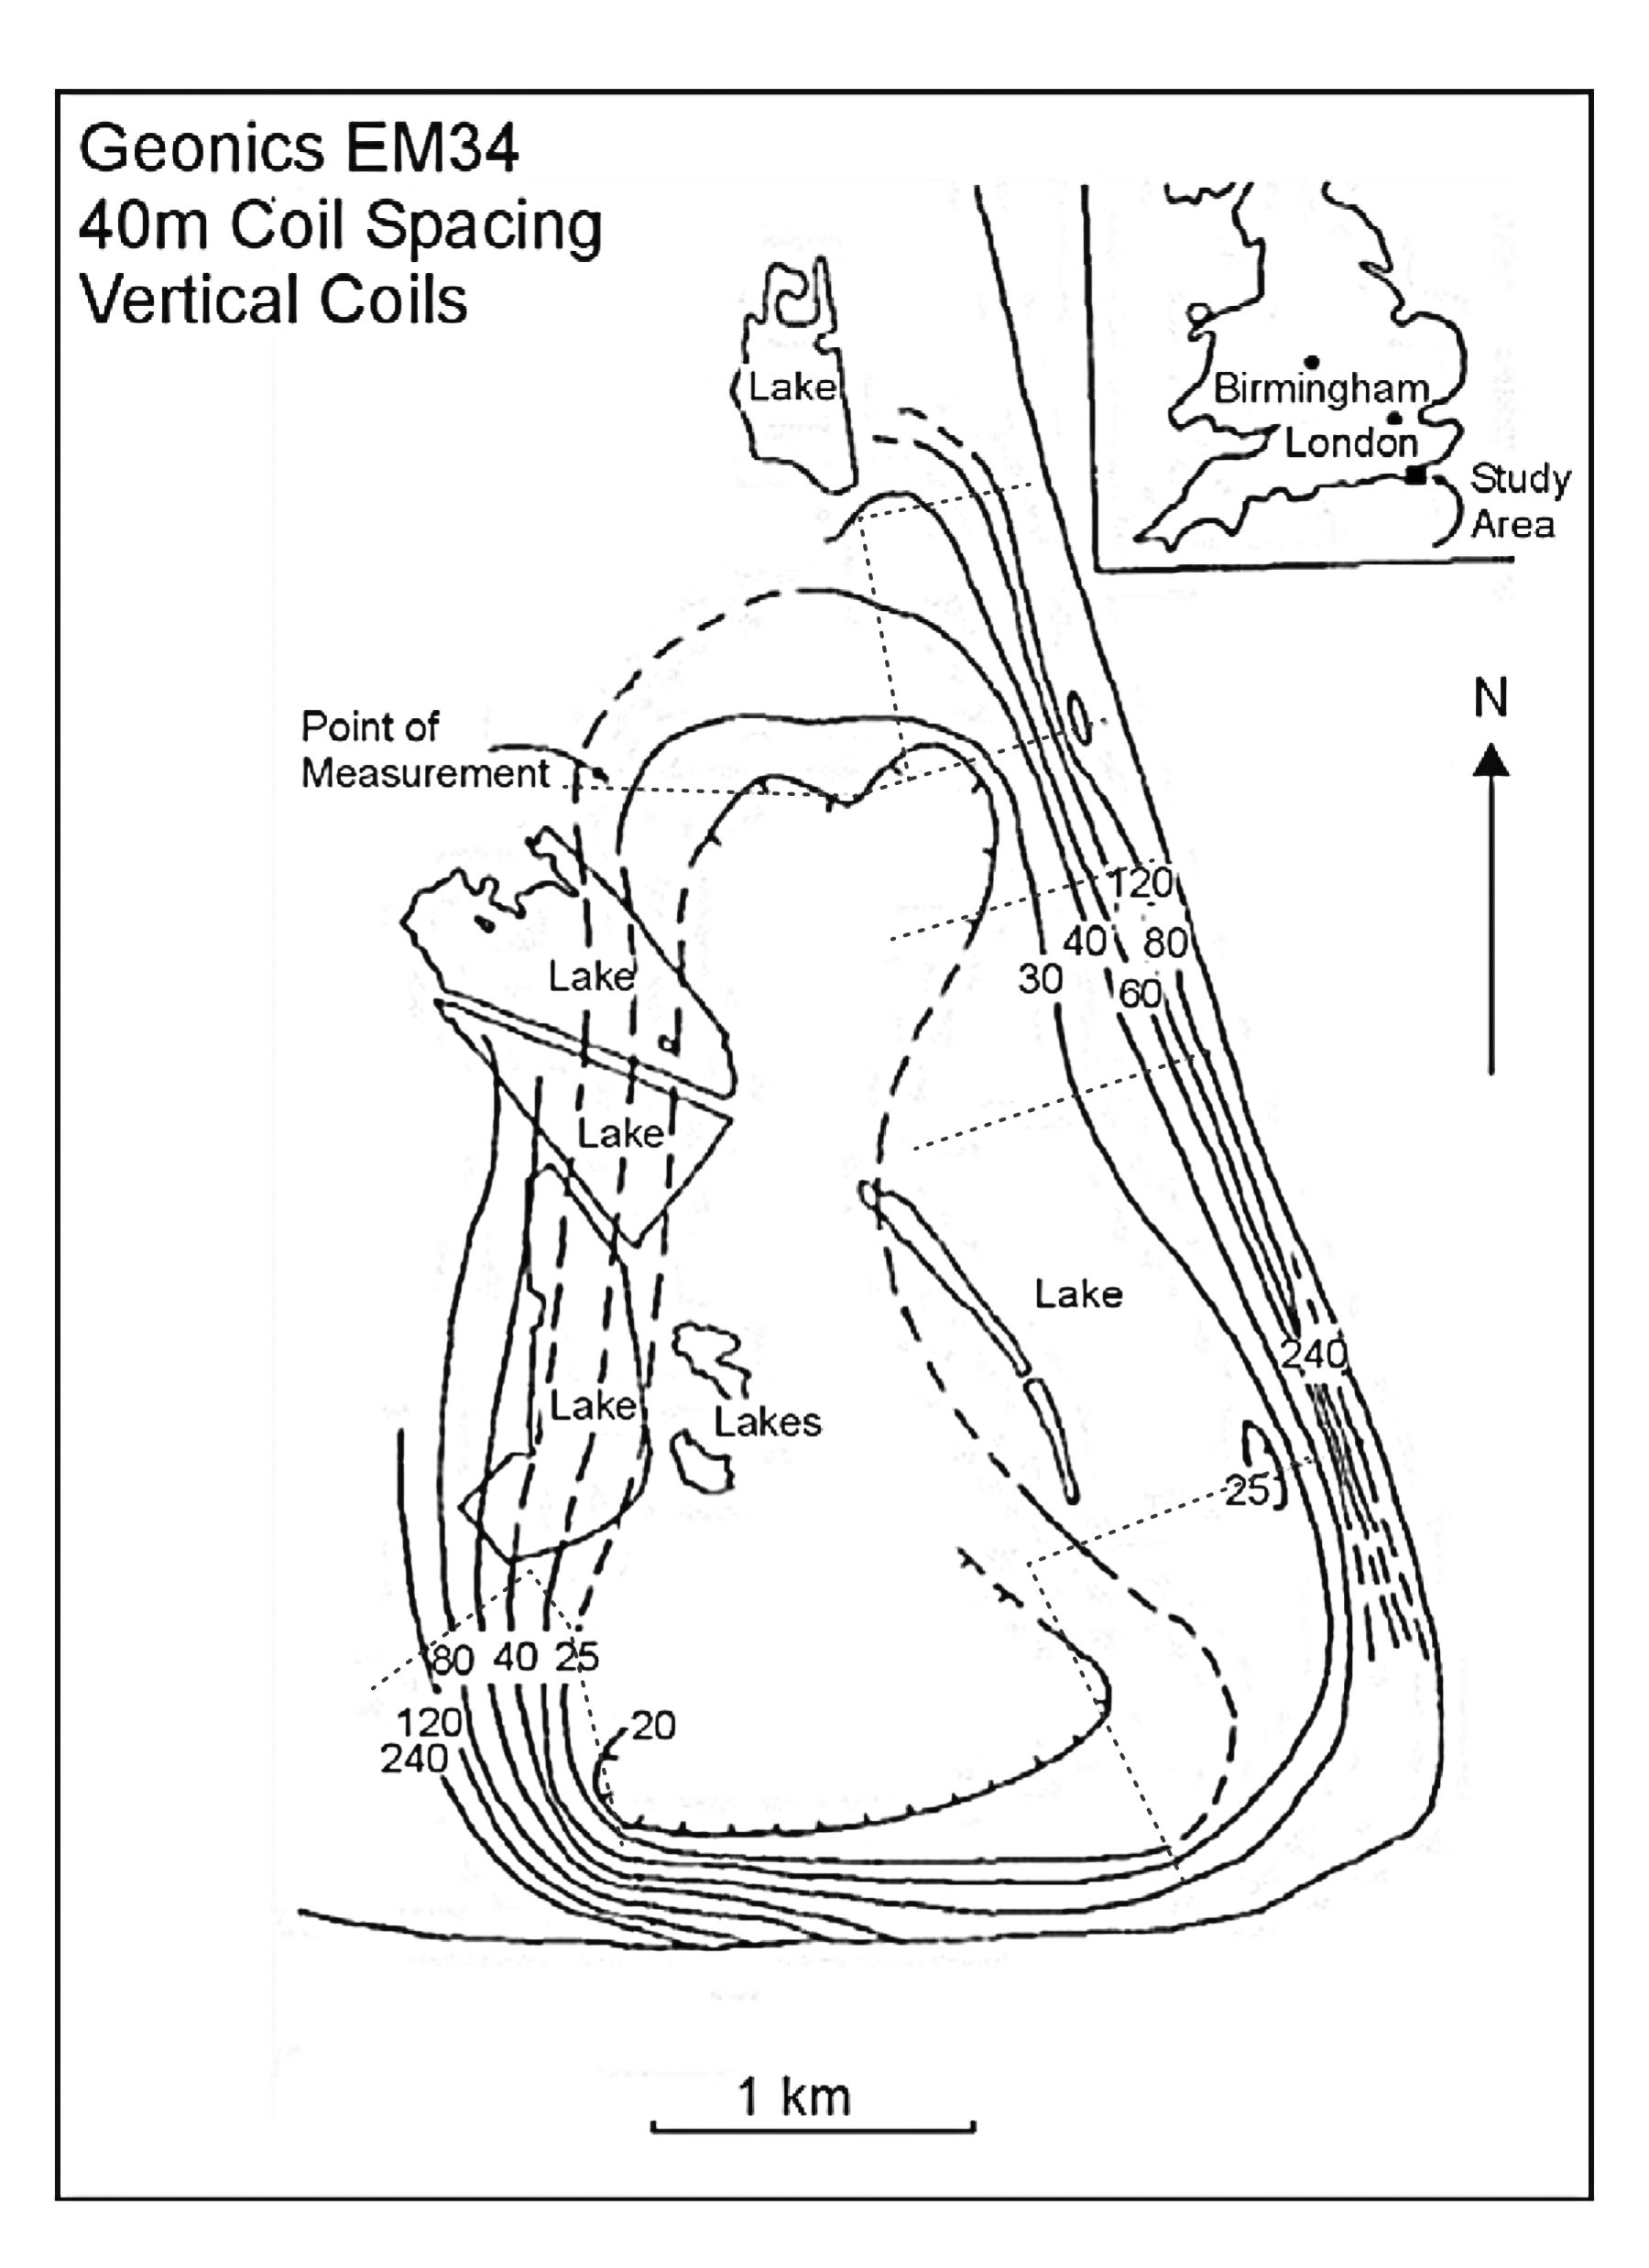 Contours of ground conductivity in mS/m, Dungeness, England. (Baker 1990; copyright permission granted by Society of Exploration Geophysicists)